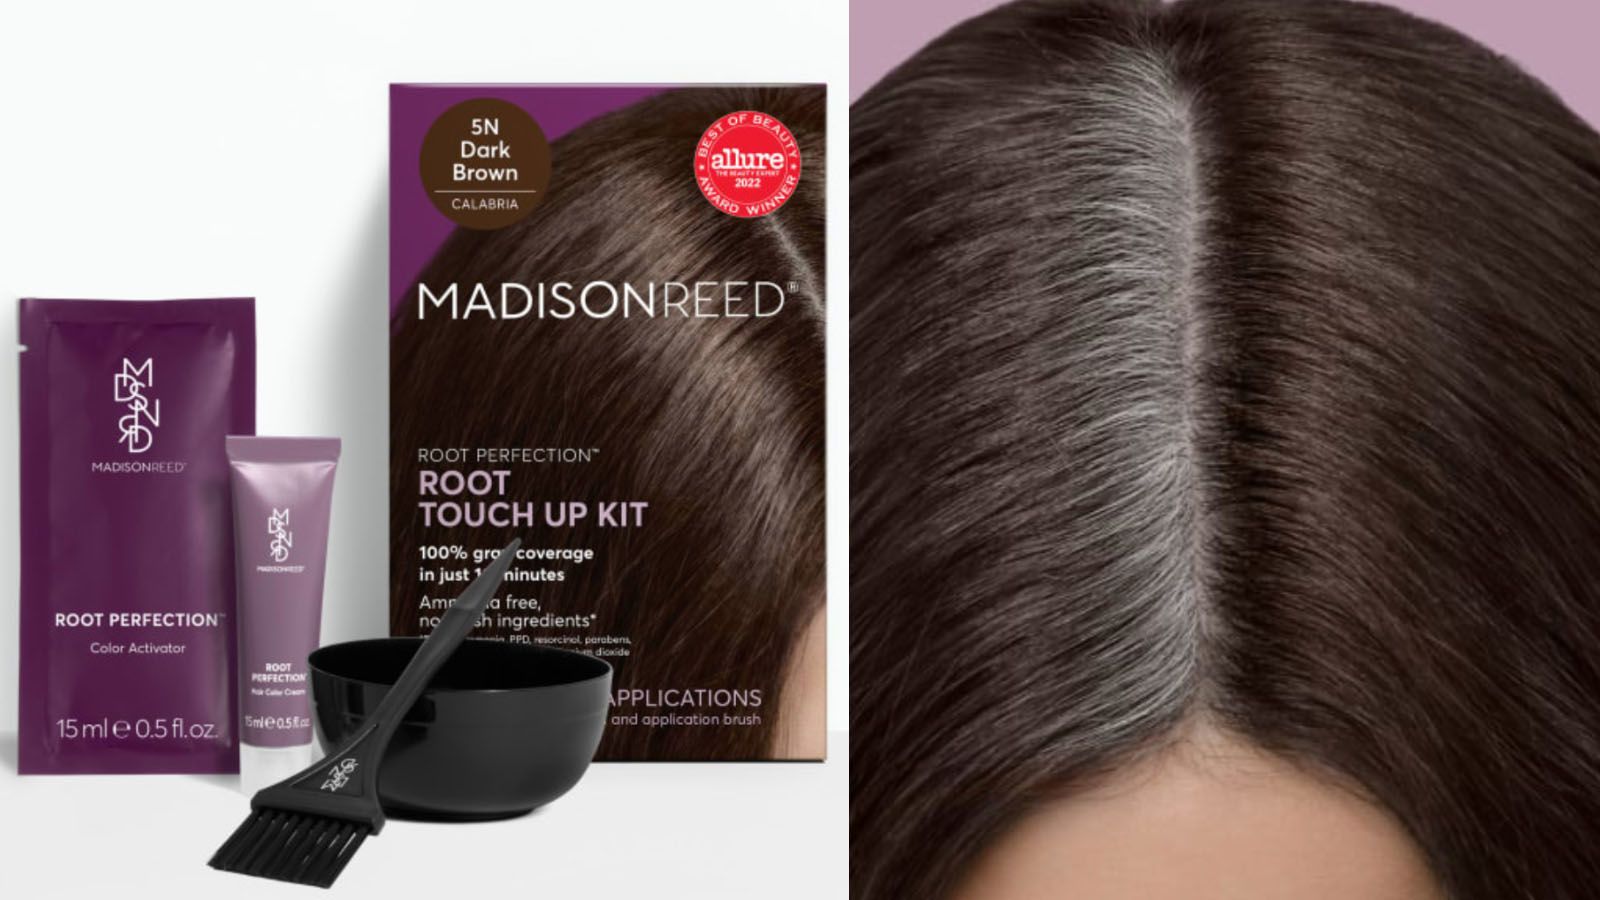 The Madison Reed hair color kit gave me salon-worthy results